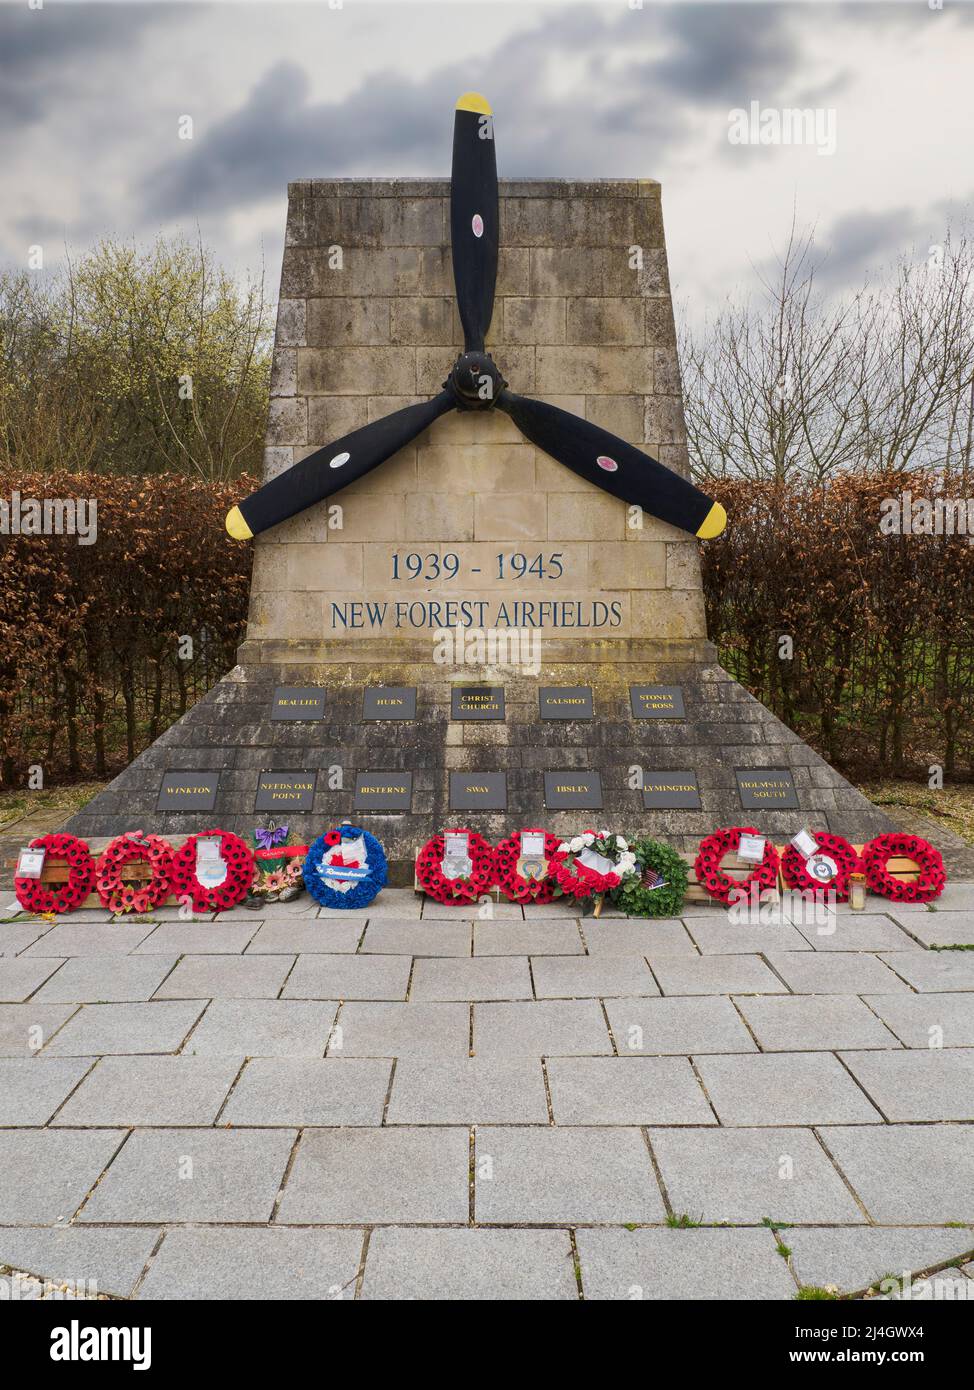 New Forest Airfields Memorial, A memorial to remember the 12 airfields within the New Forest area and the people who served at them, Bransgore, Hampsh Stock Photo